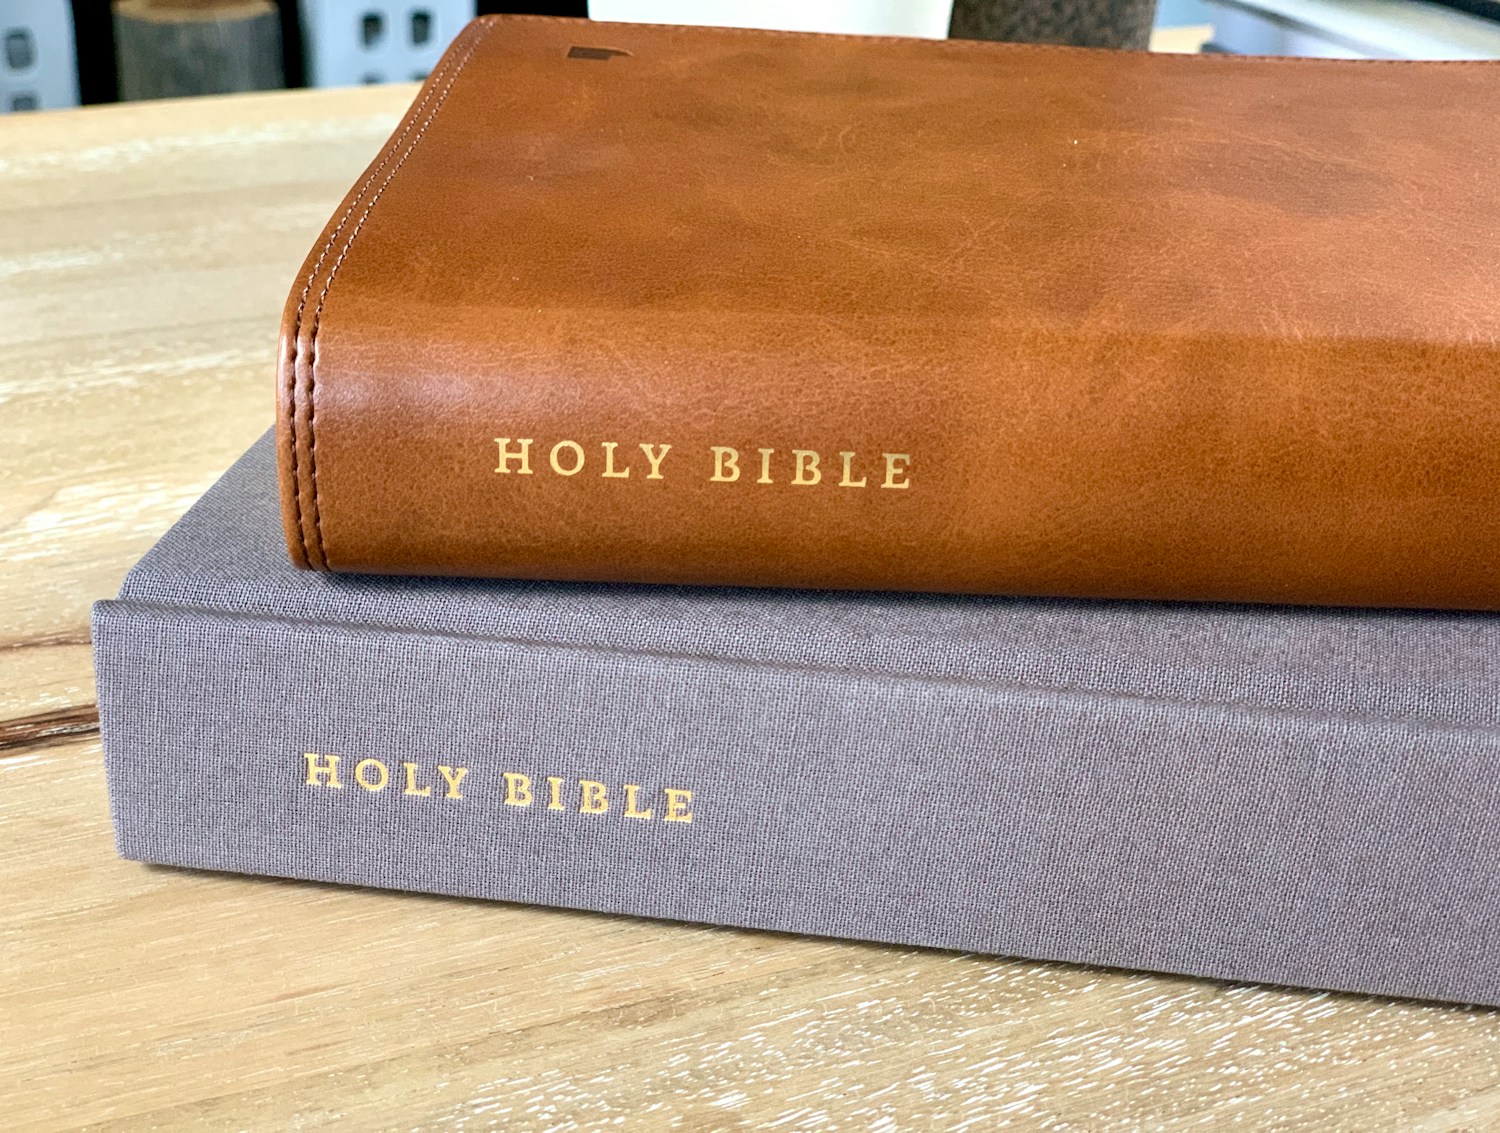 Oklahoma will be Incorporating the Bible into Public School Lessons — In a move that has stirred up considerable debate, Oklahoma's top education official has issued a directive for public schools to integrate the Bible into classroom instruction for students in grades 5 through 12. This mandate, announced by Republican State Superintendent Ryan Walters, calls for "immediate and strict compliance," signaling a significant shift in the state's educational approach¹.